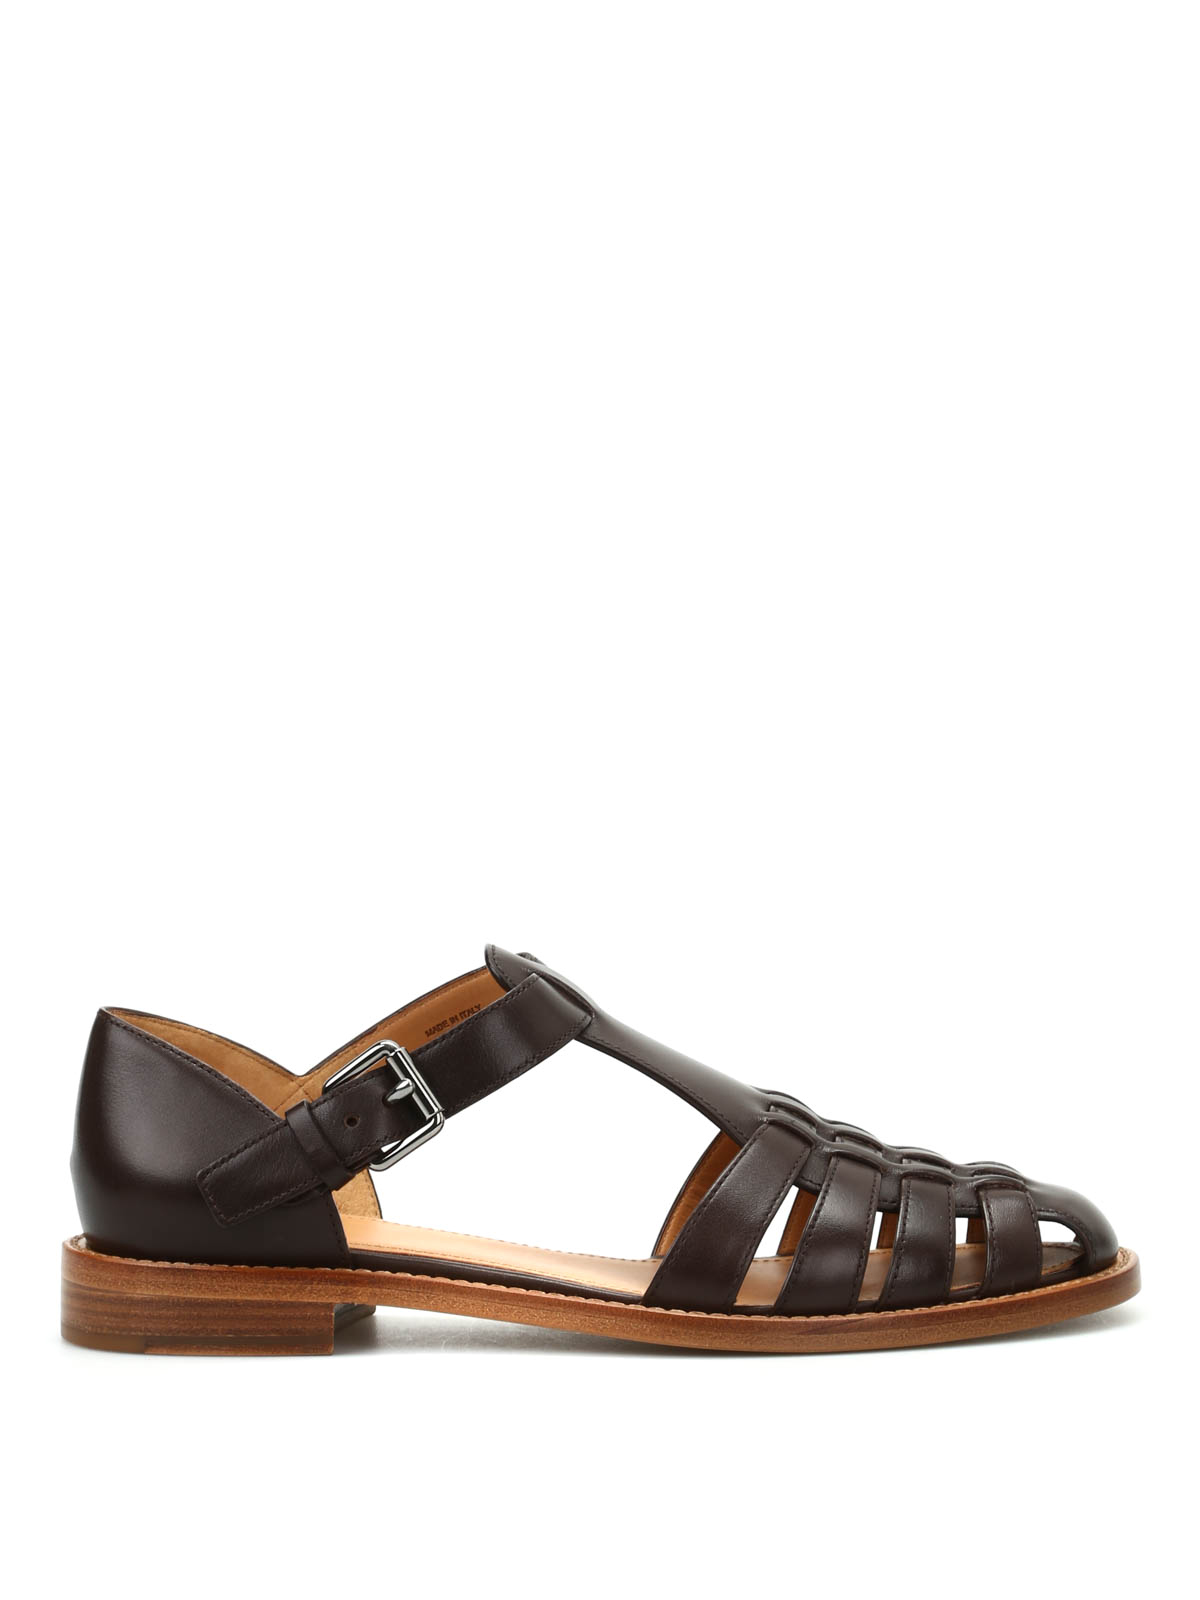  Kelsey  sandals  by Church s sandals  iKRIX